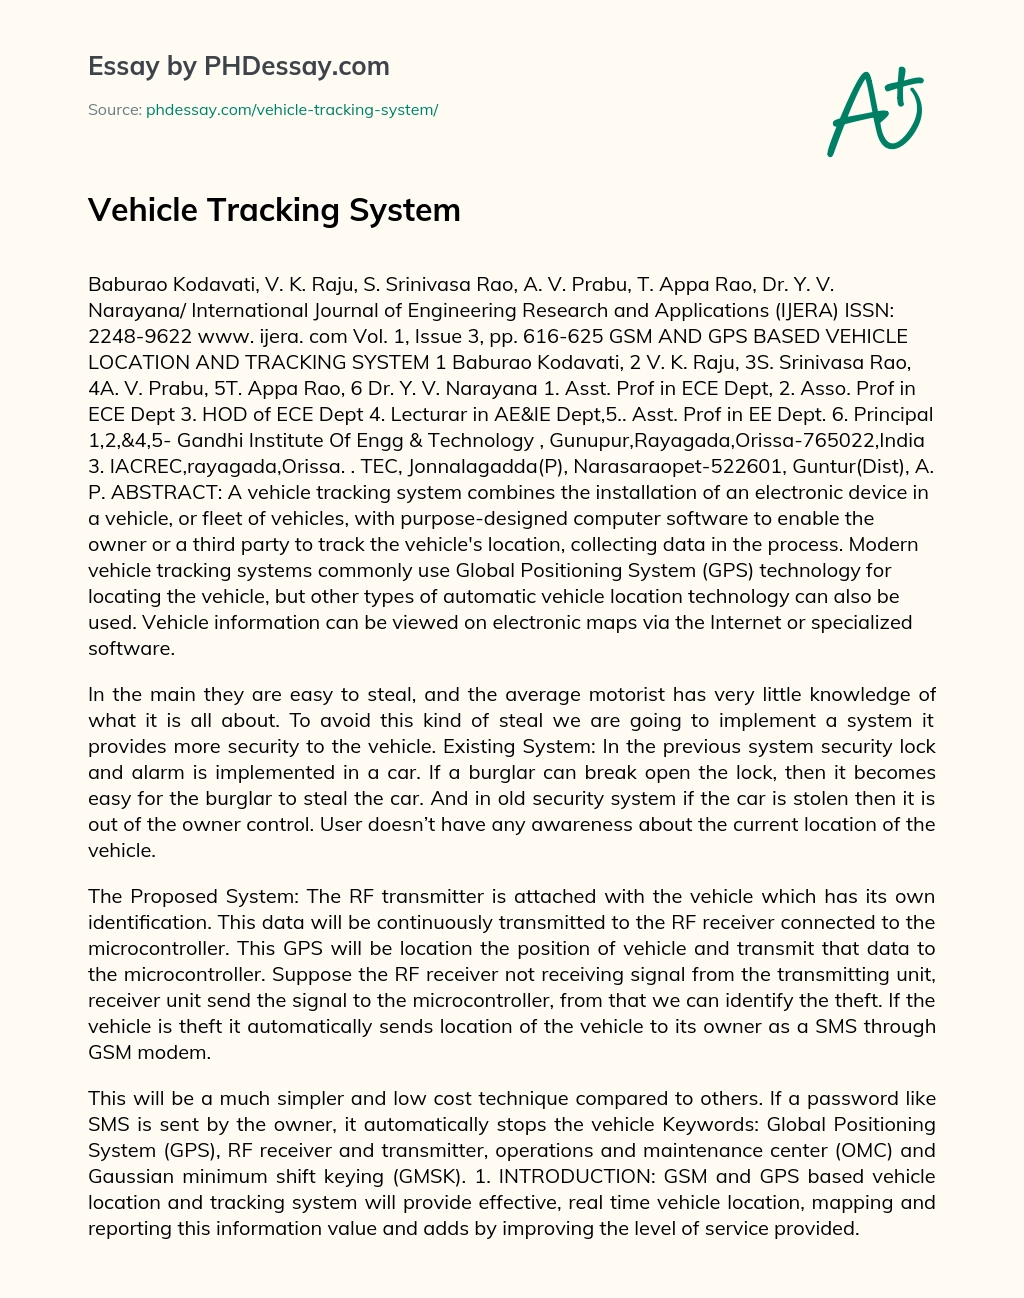 Vehicle Tracking System essay